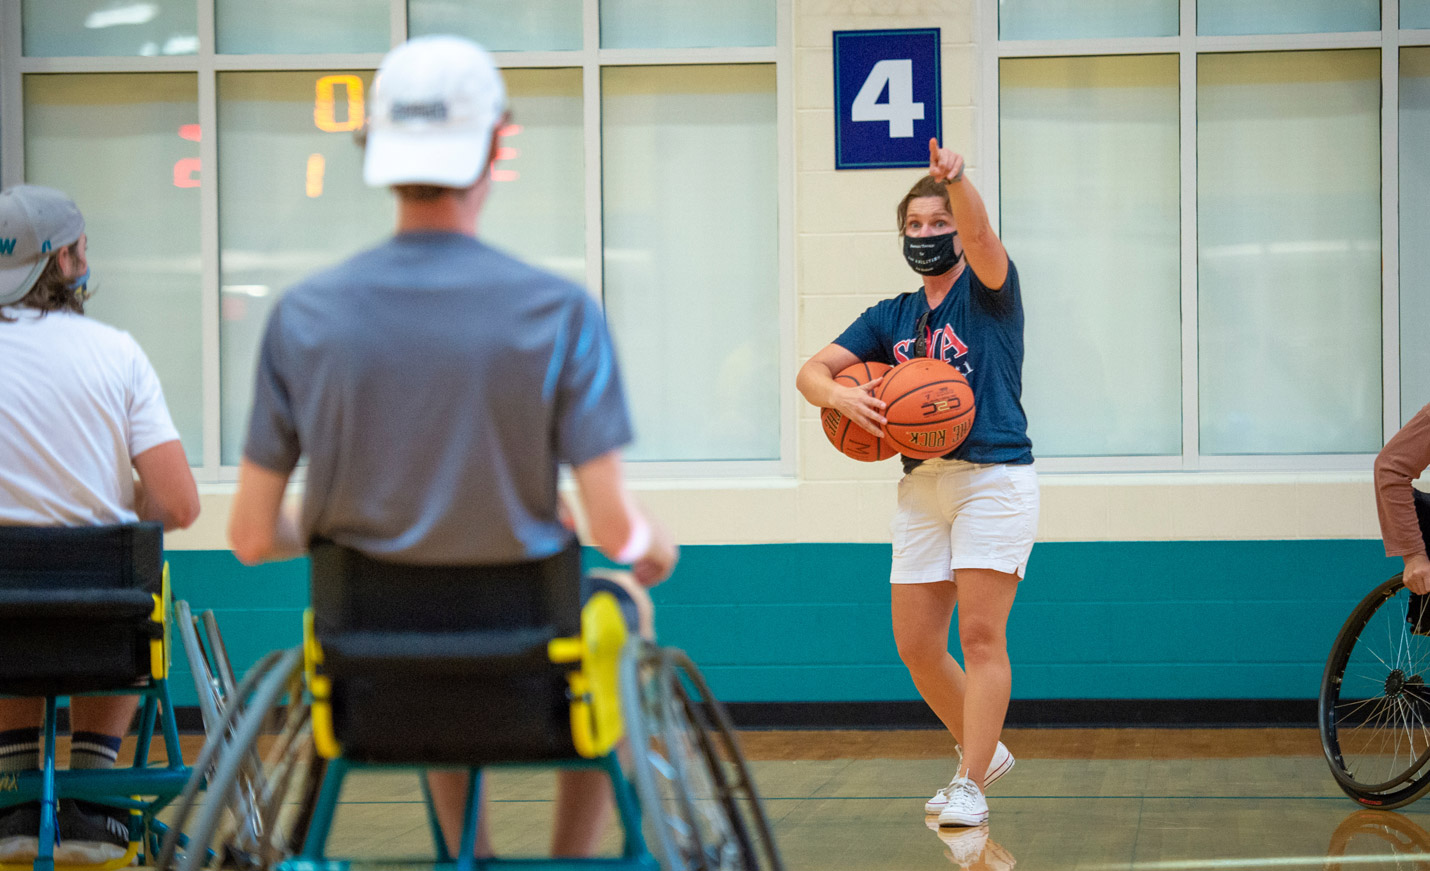 Students playing a game of wheelchair basketball while their instructor gives direction.